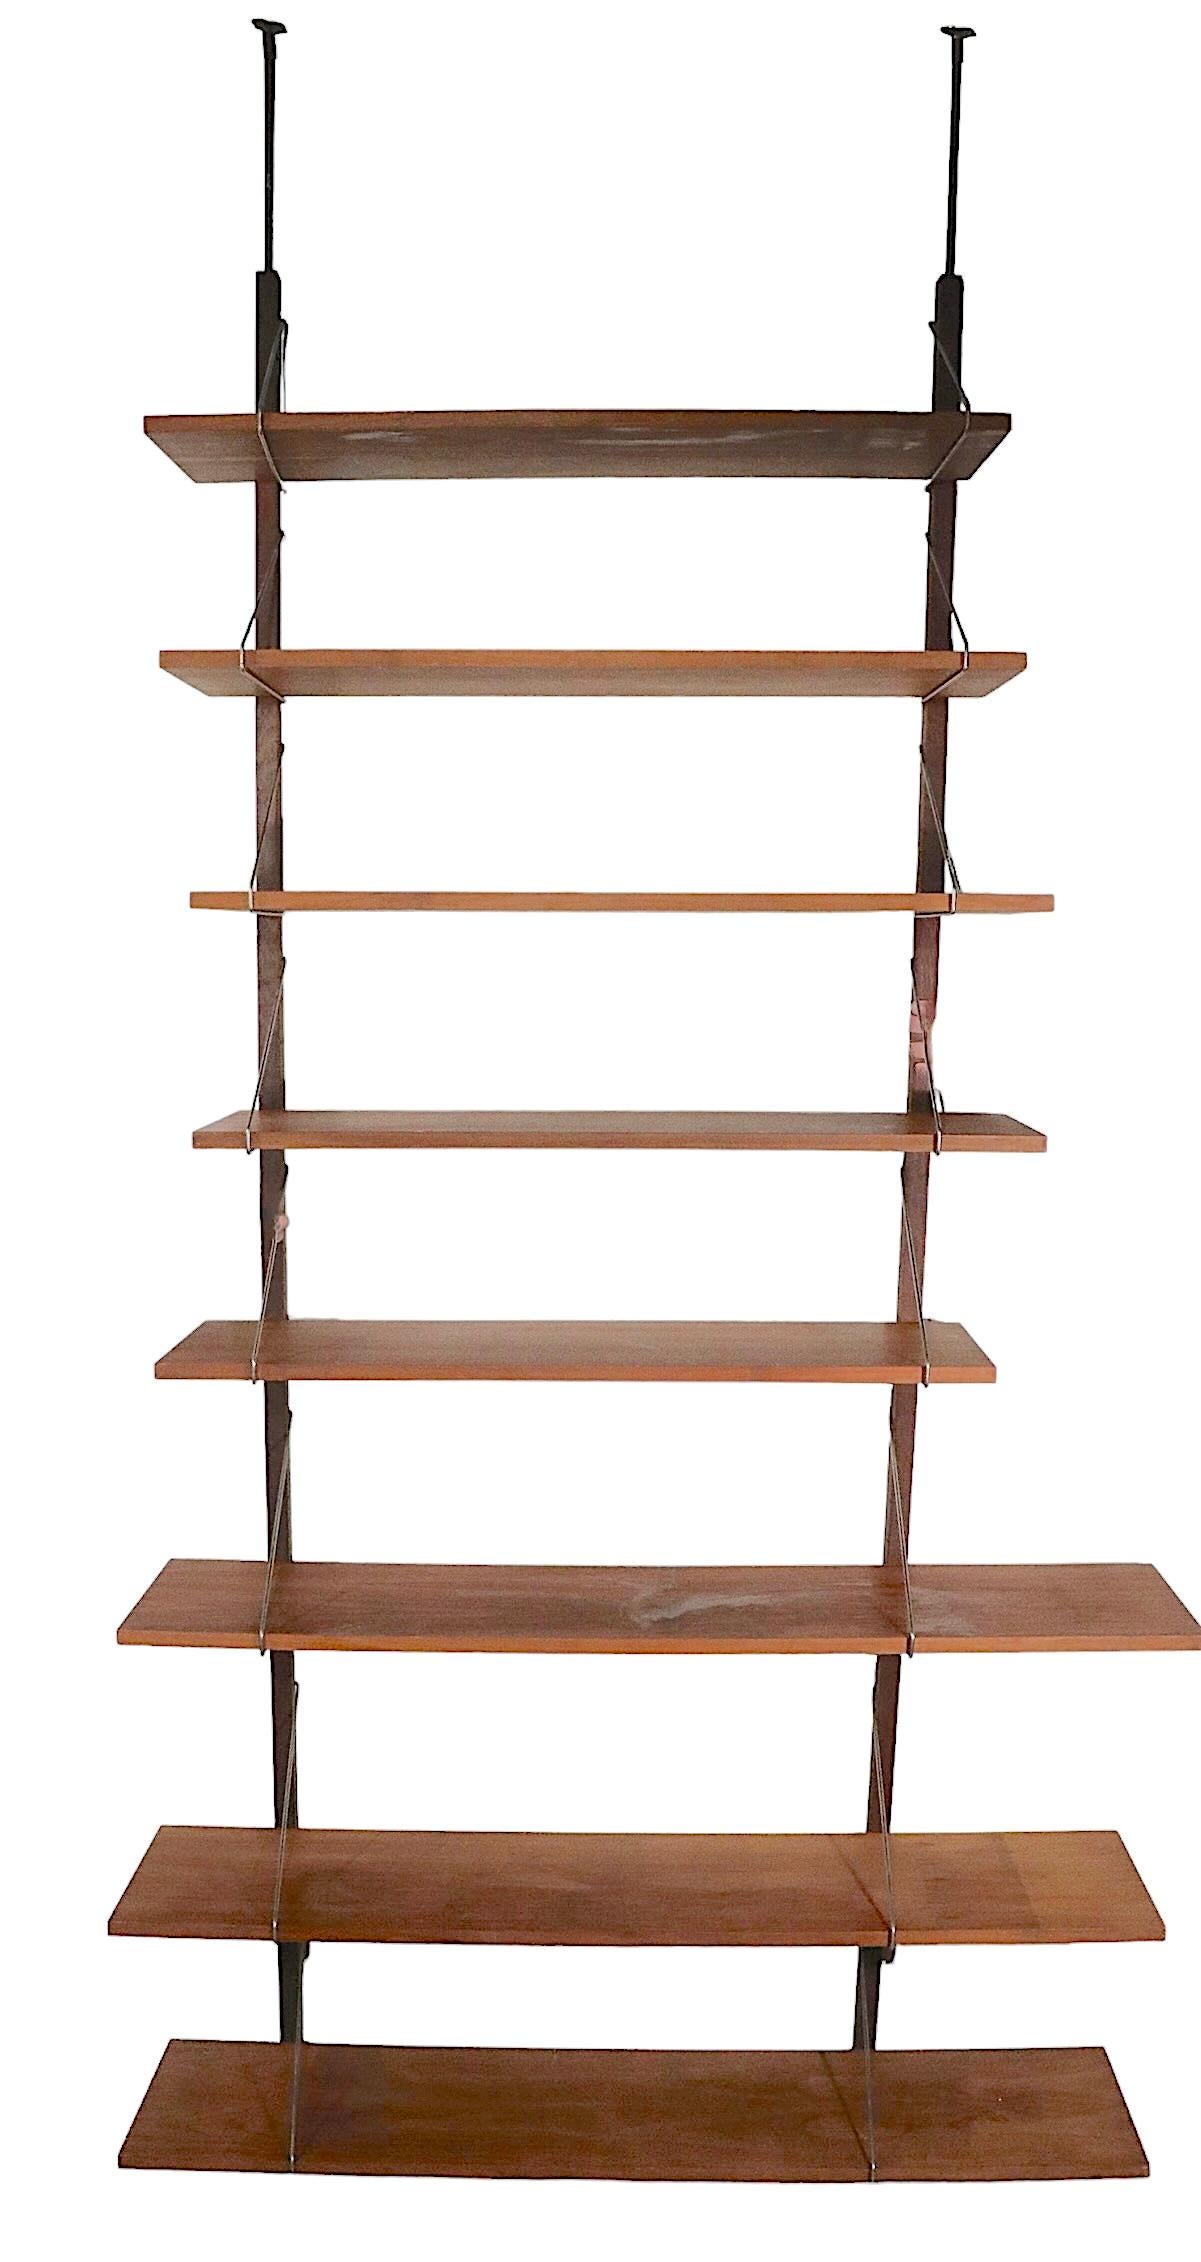 Metal Danish Mid Century Wall Unit with 8 Shelves, circa 1950 - 1960s For Sale